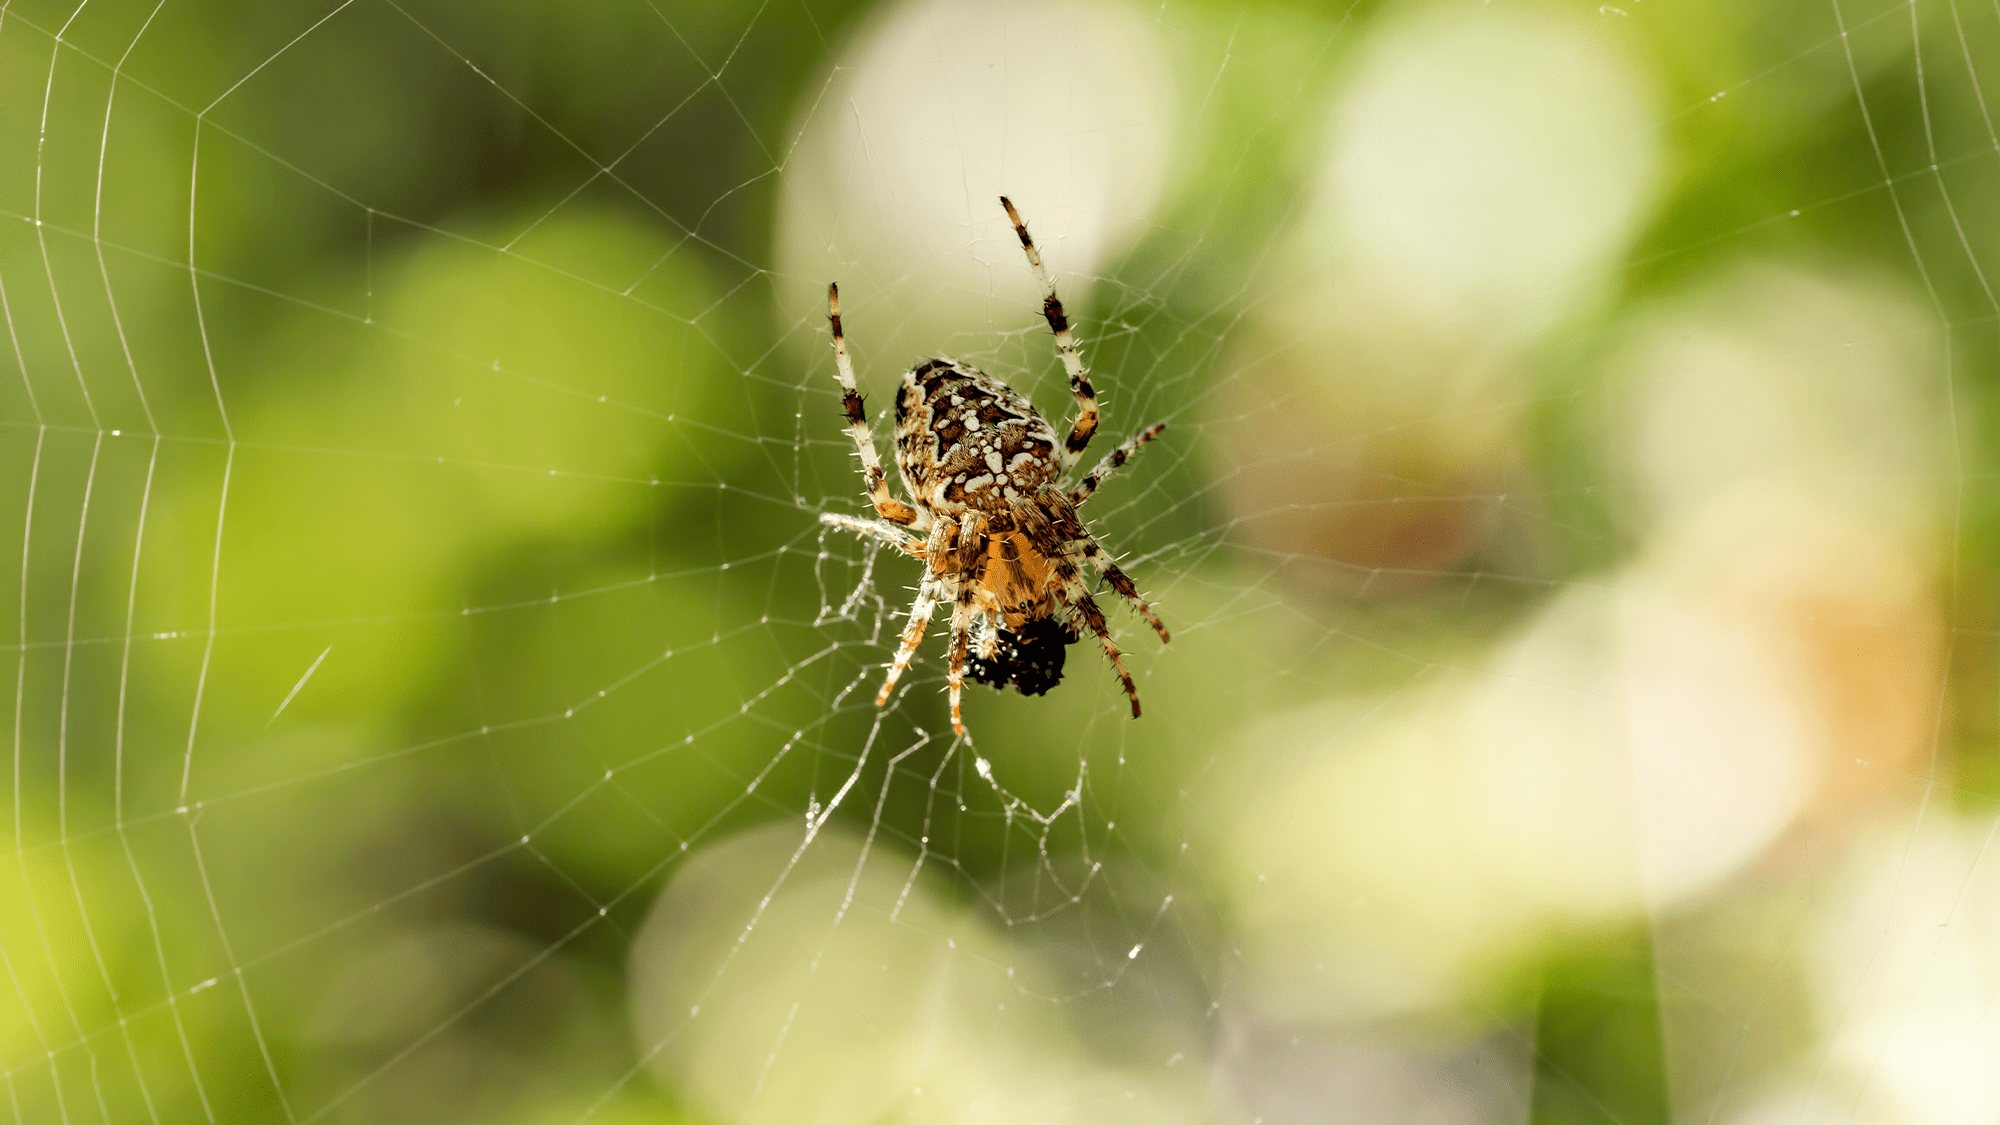 Spider glue might evolve faster than the spiders themselves